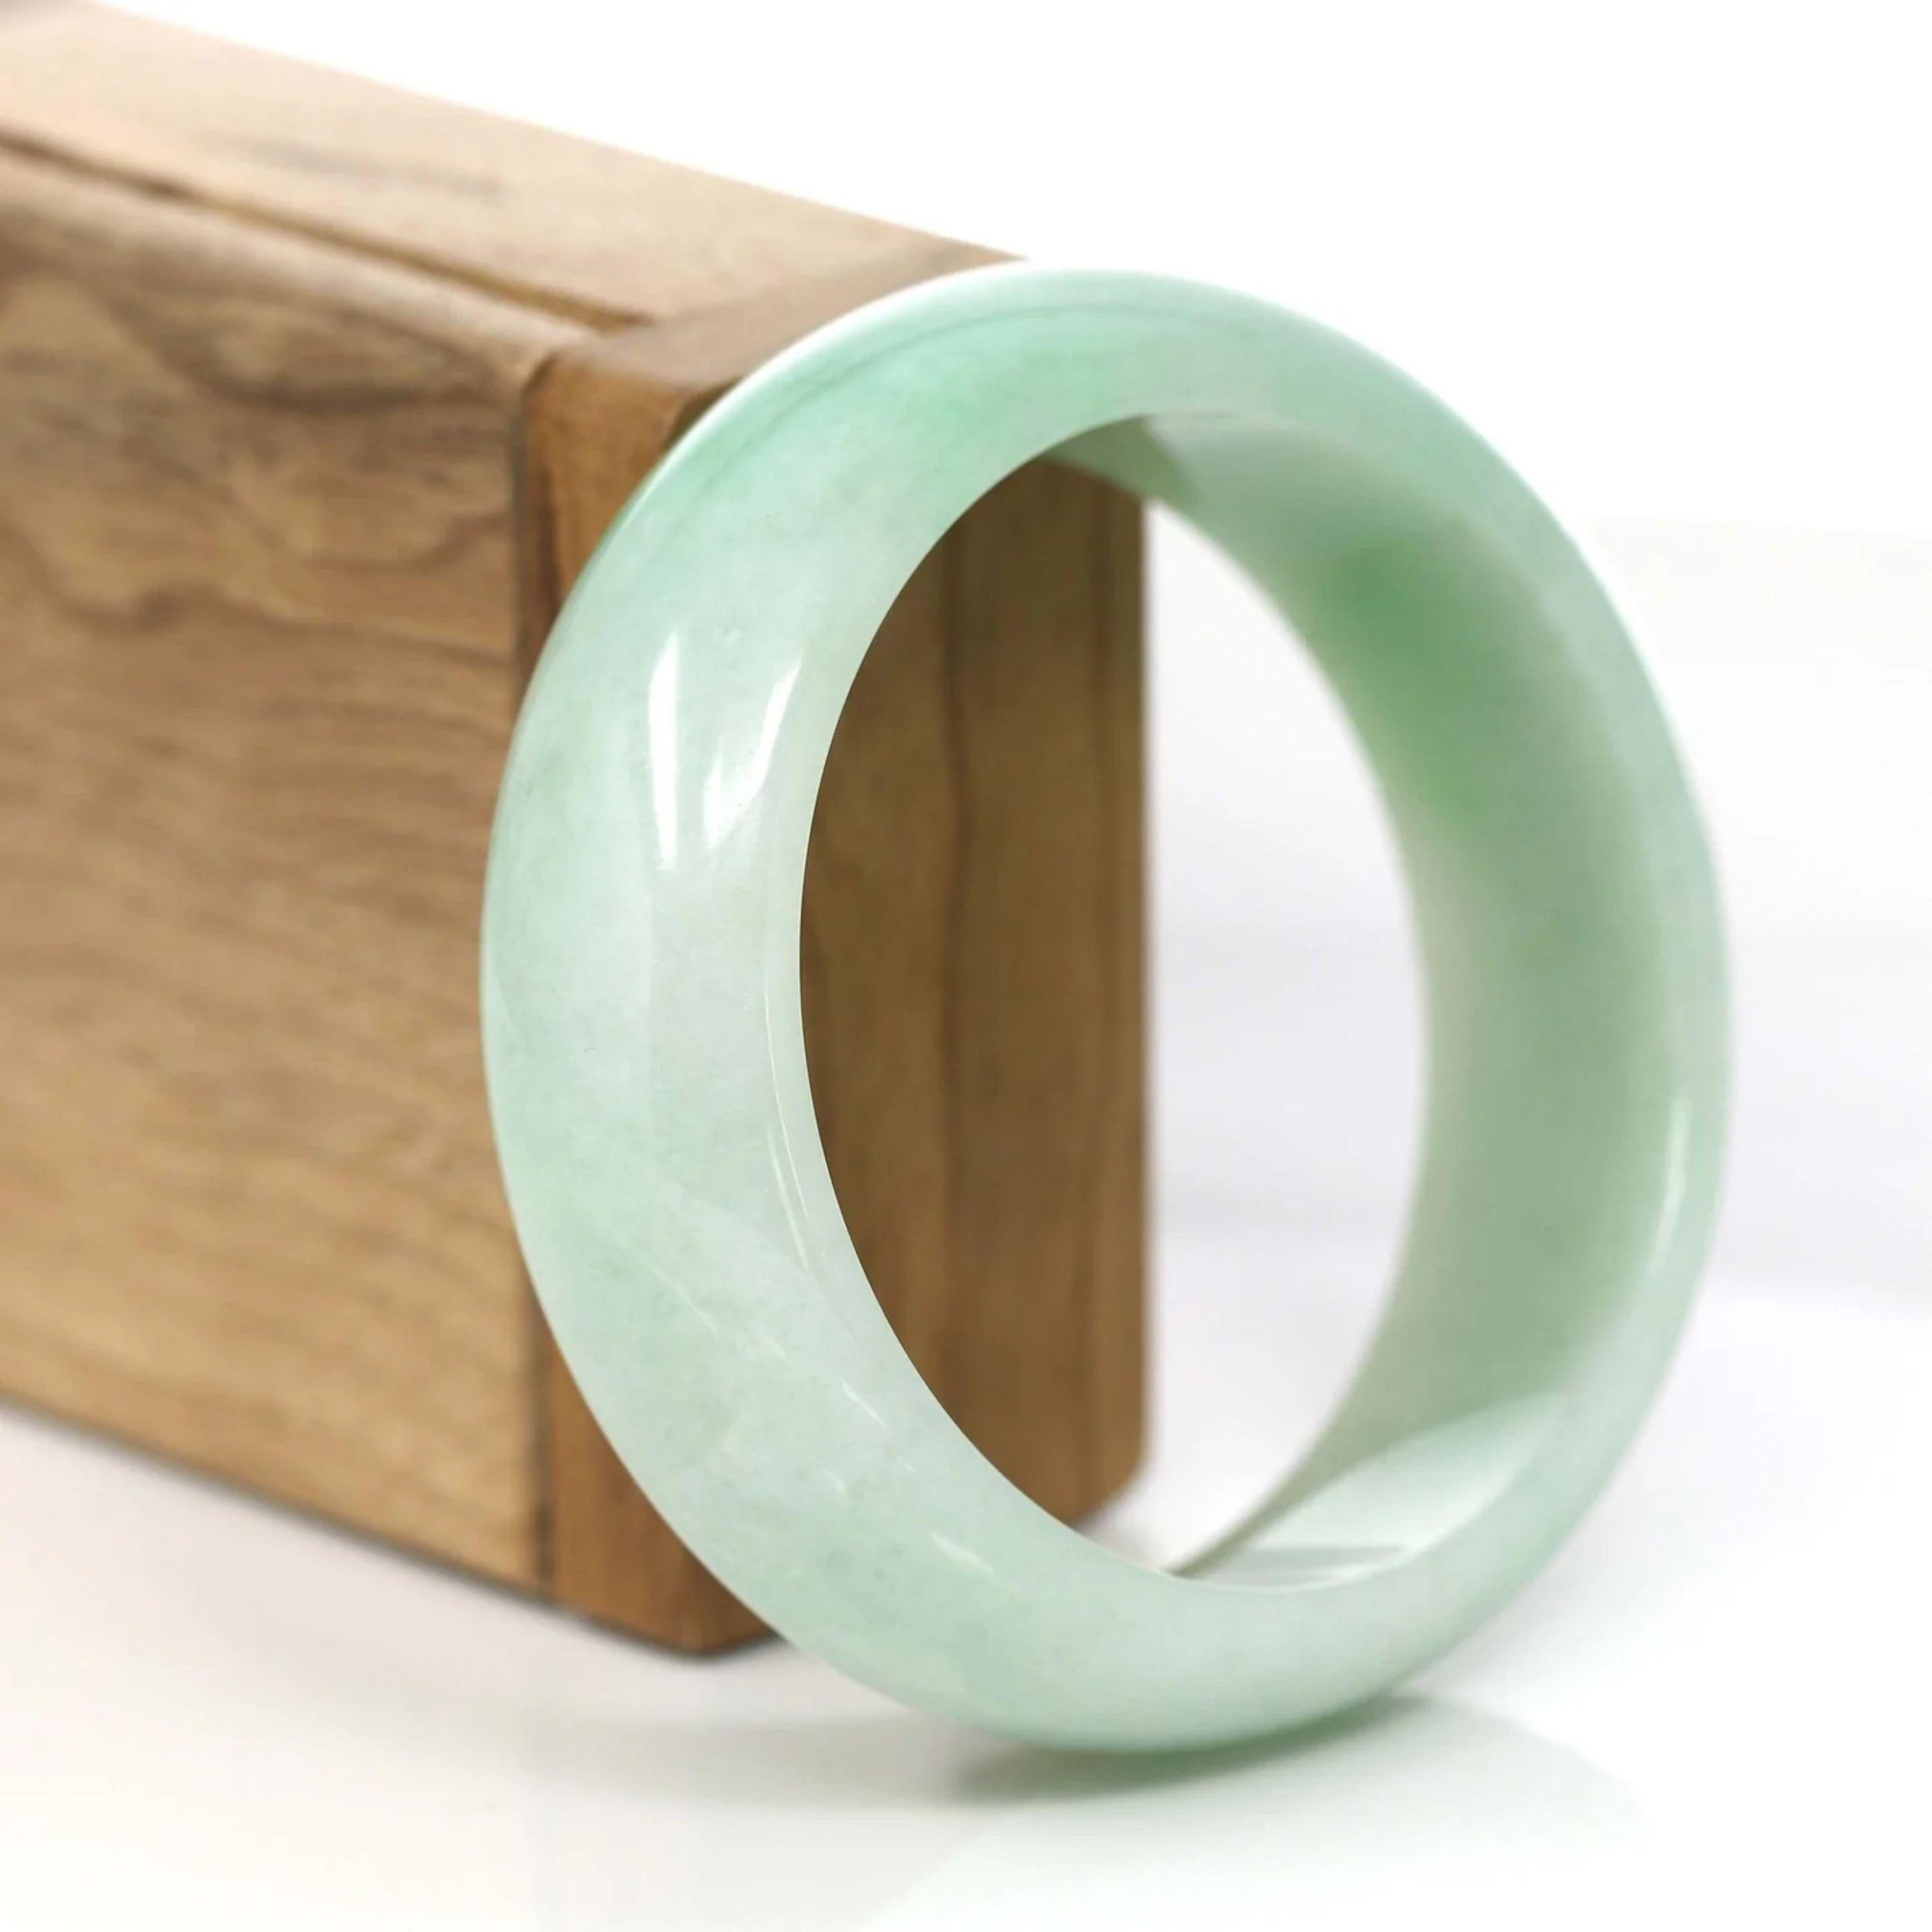 * DETAILS--- This bangle is made with very high-quality genuine Burmese Jadeite jade. The jade texture is fine and smooth with green color. It looks so beautiful in a wider size. It's a luxury gift for you and your love. It's a collectible item.

*